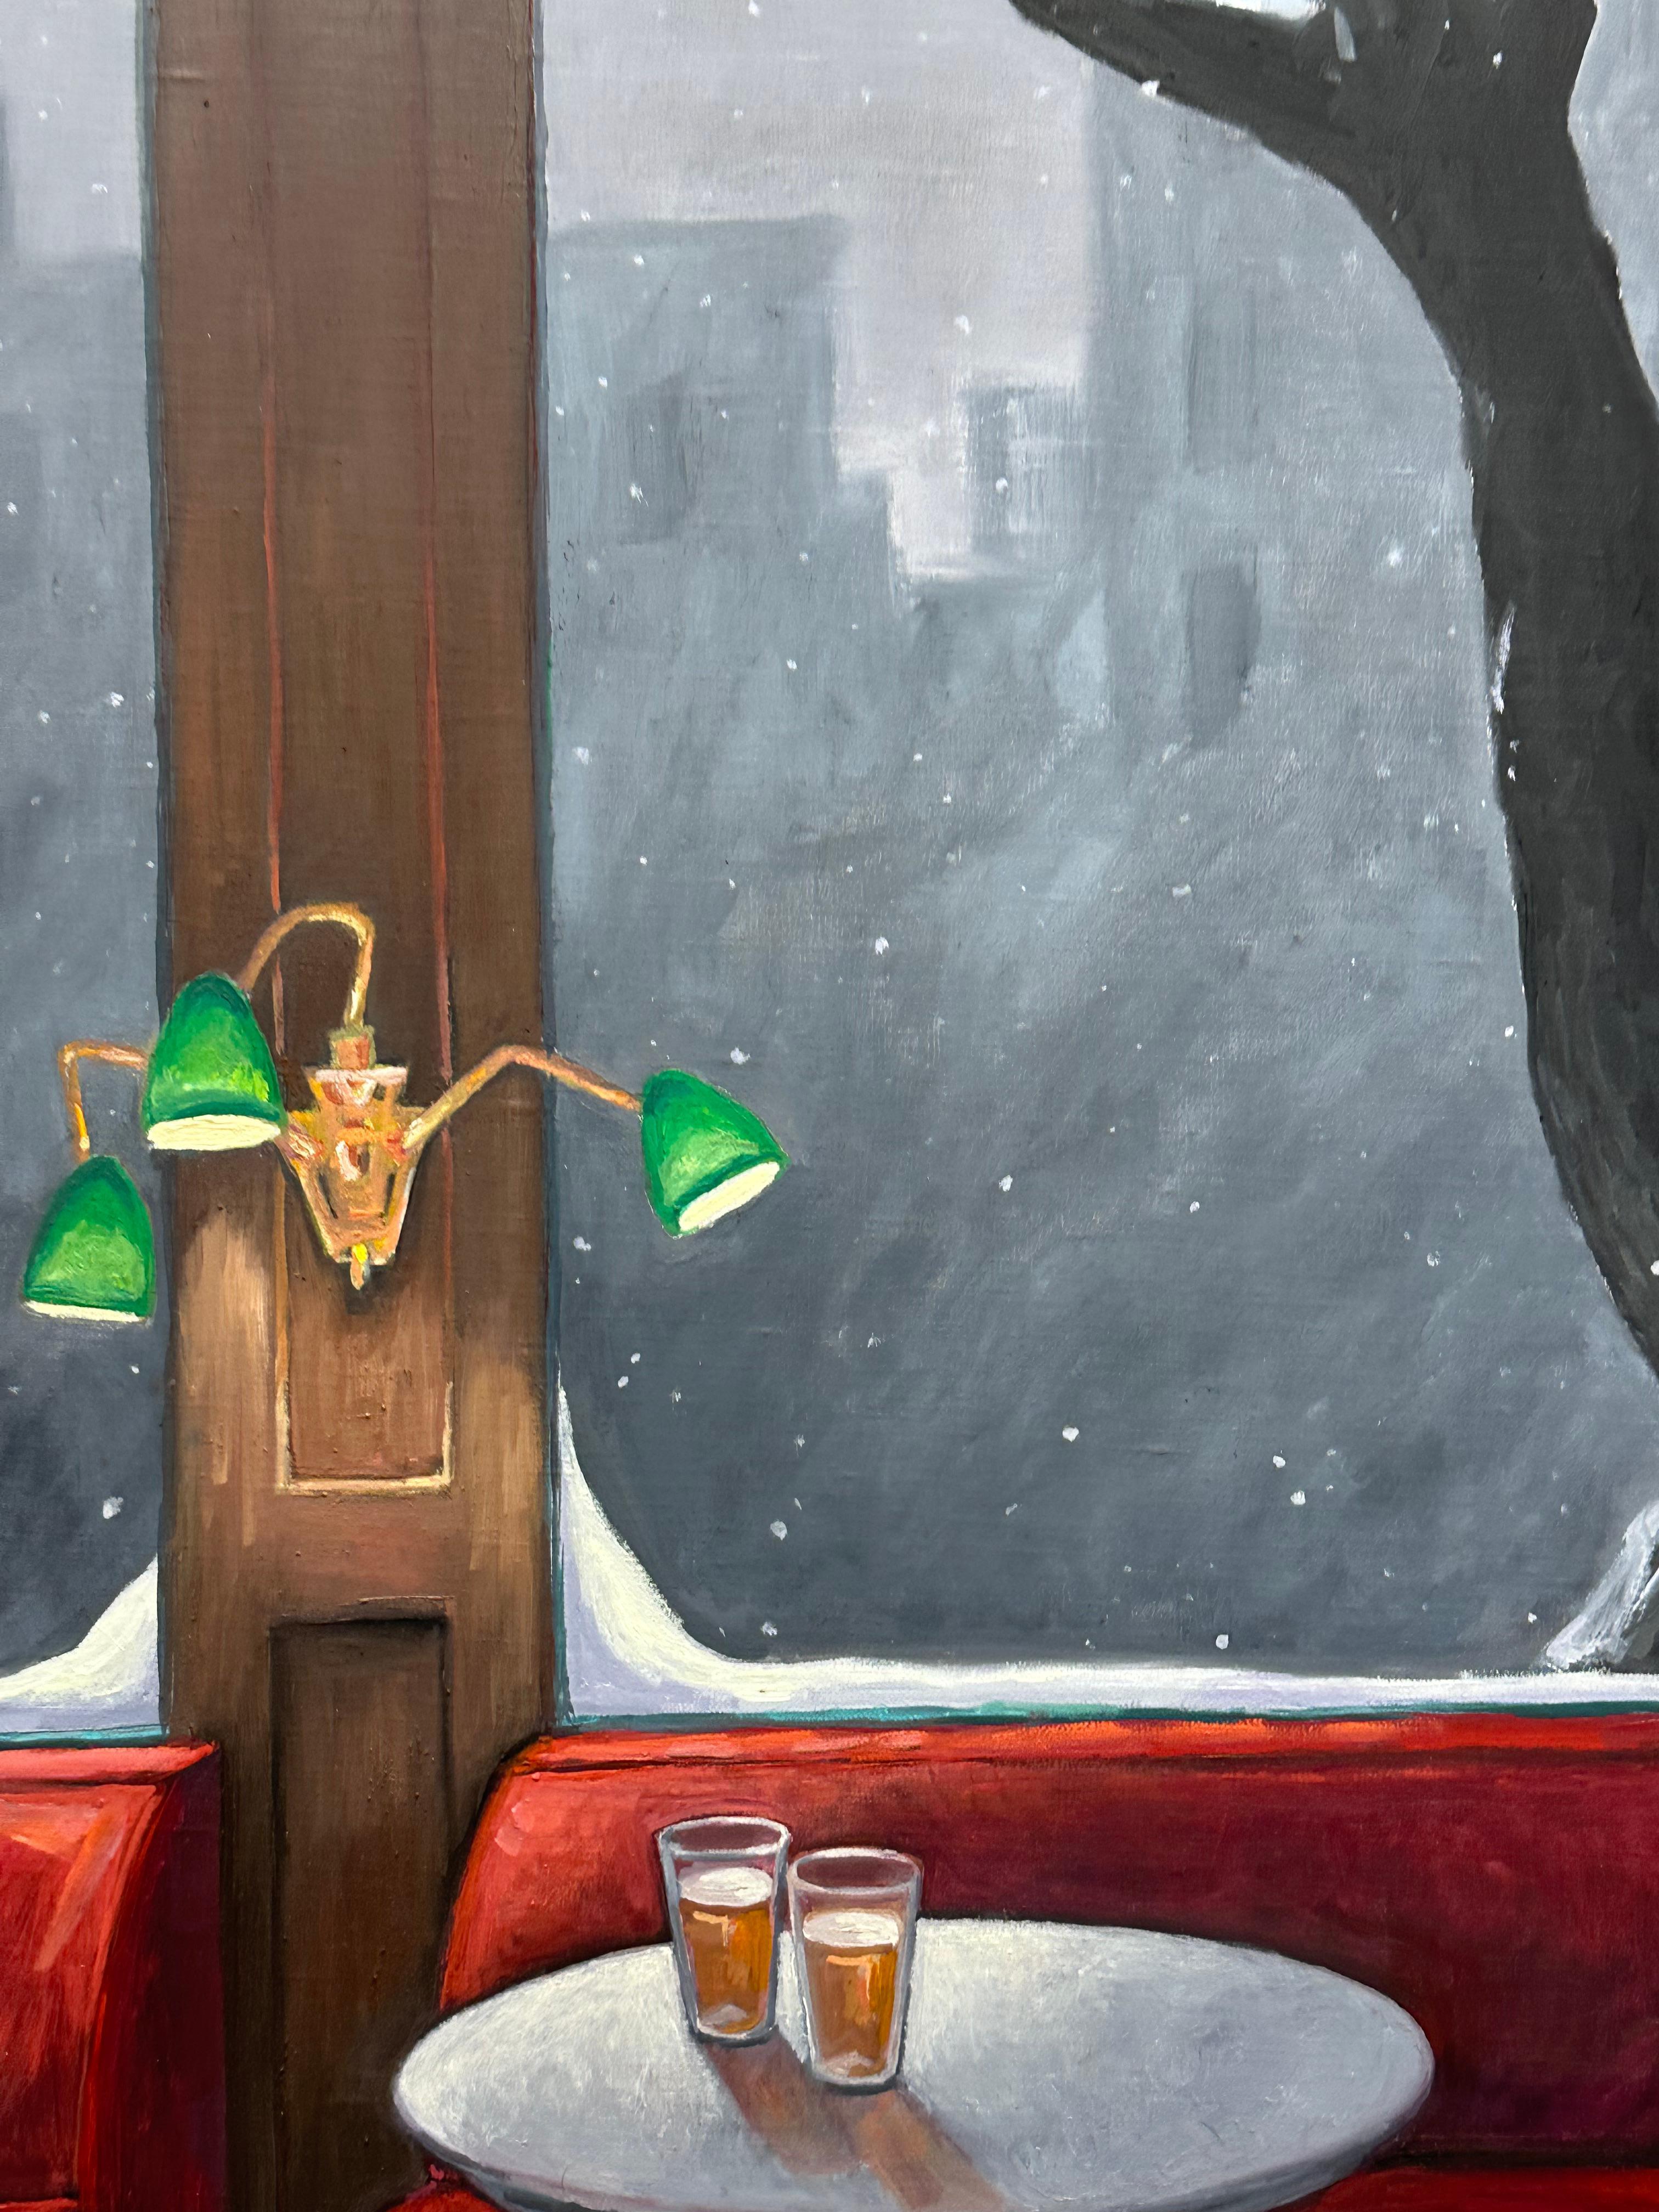 Two beer glasses sit on a small round table, illuminated by a green sconce and framed by a snowy scene outside the window of the cozy bar in this peaceful, wintry still life by KK Kozik. Signed, dated, and titled on verso.

KK Kozik is a landscape